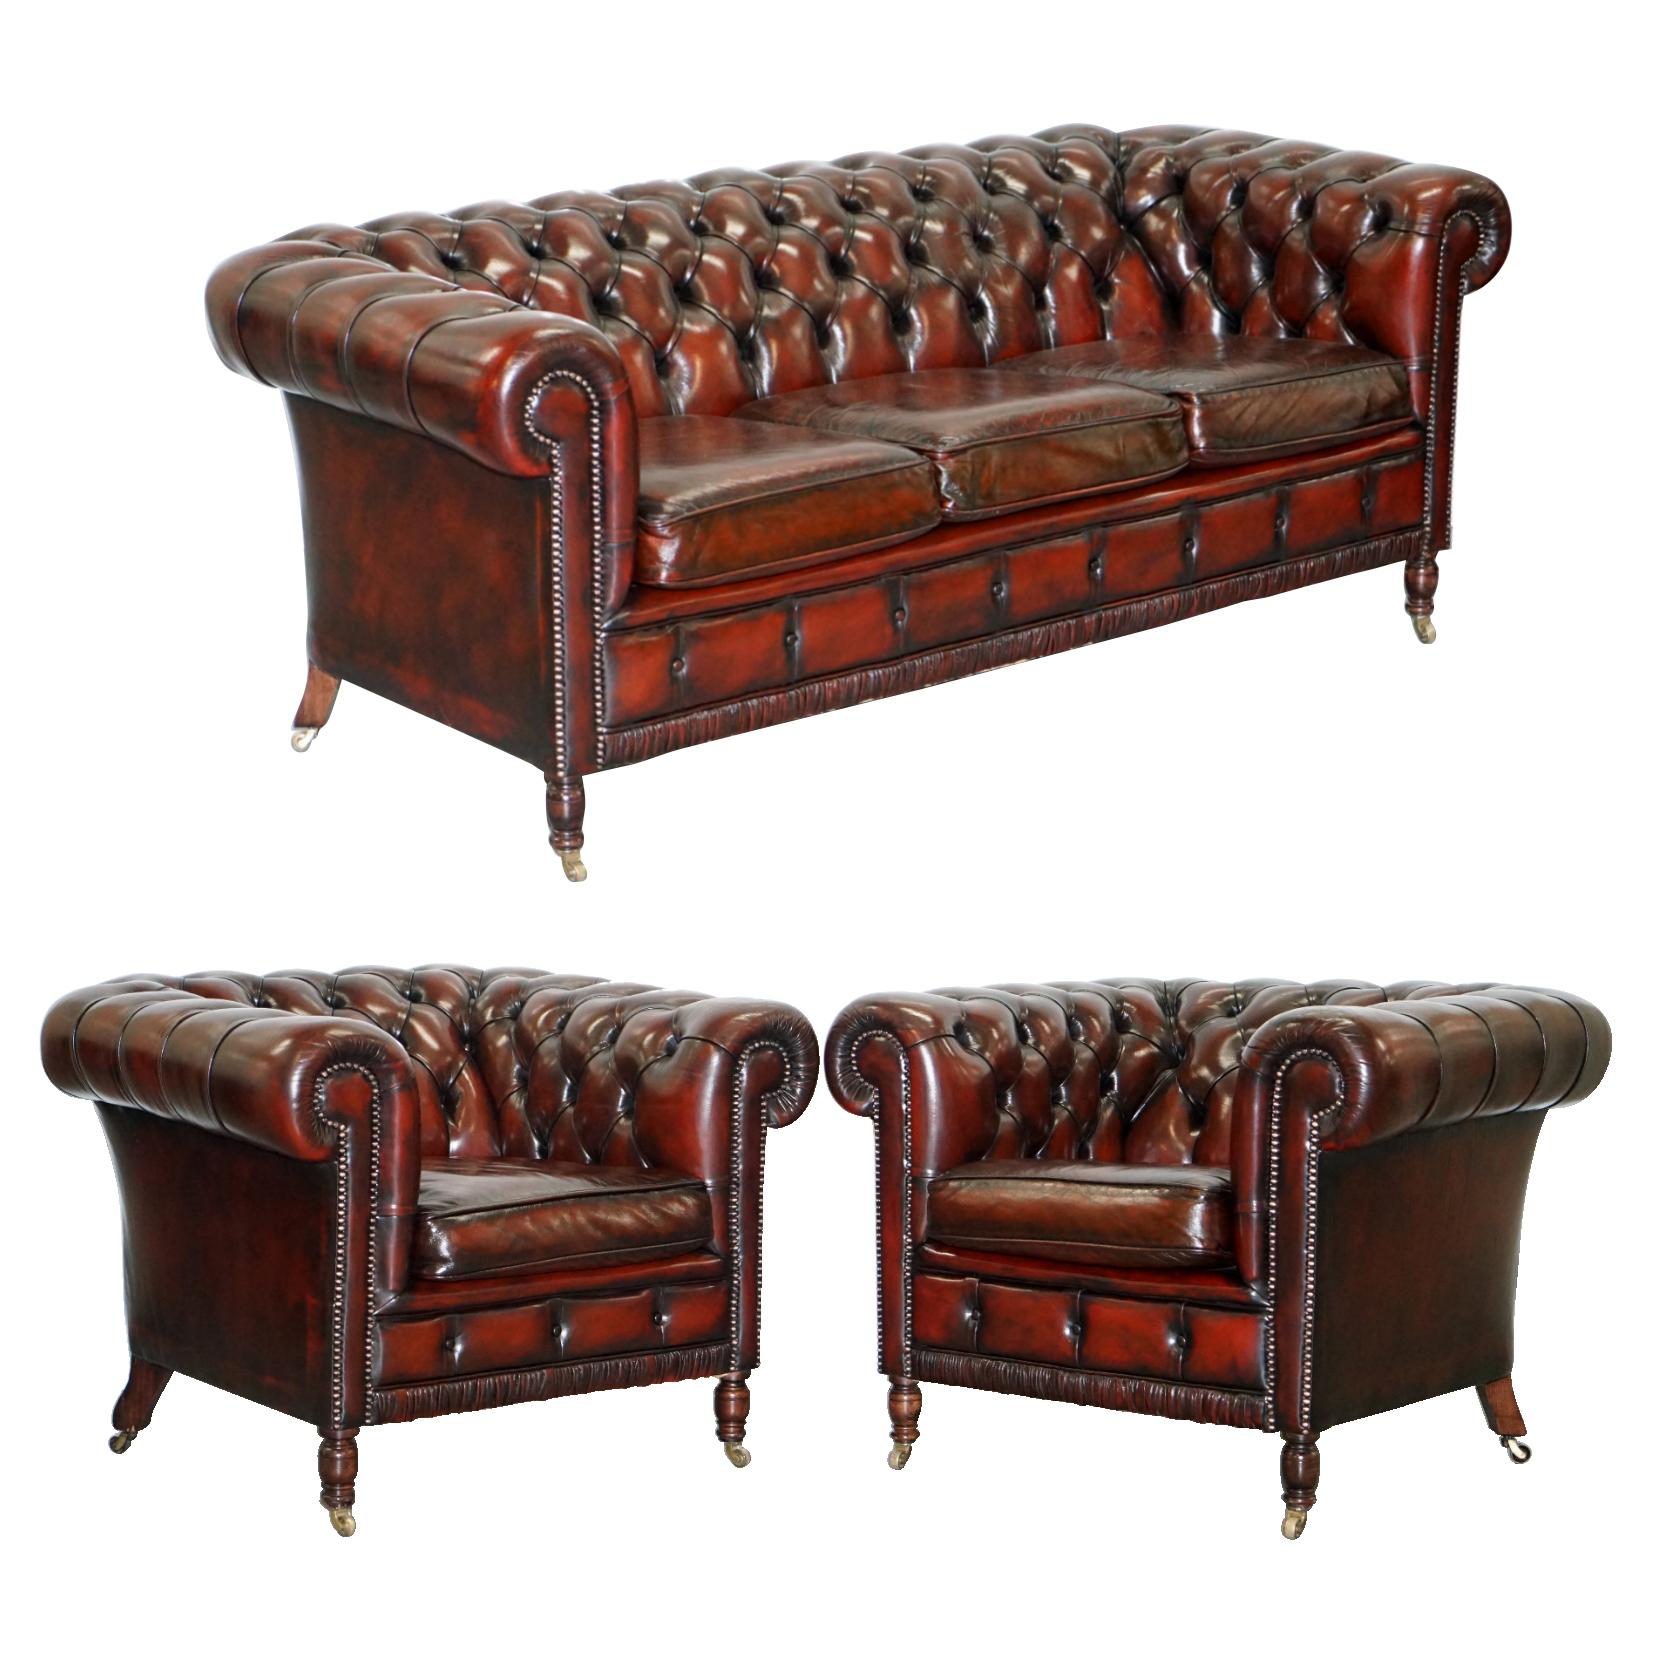 Restored Bordeaux Leather Chesterfield Club Suite Armchair & Sofa on Turned Legs